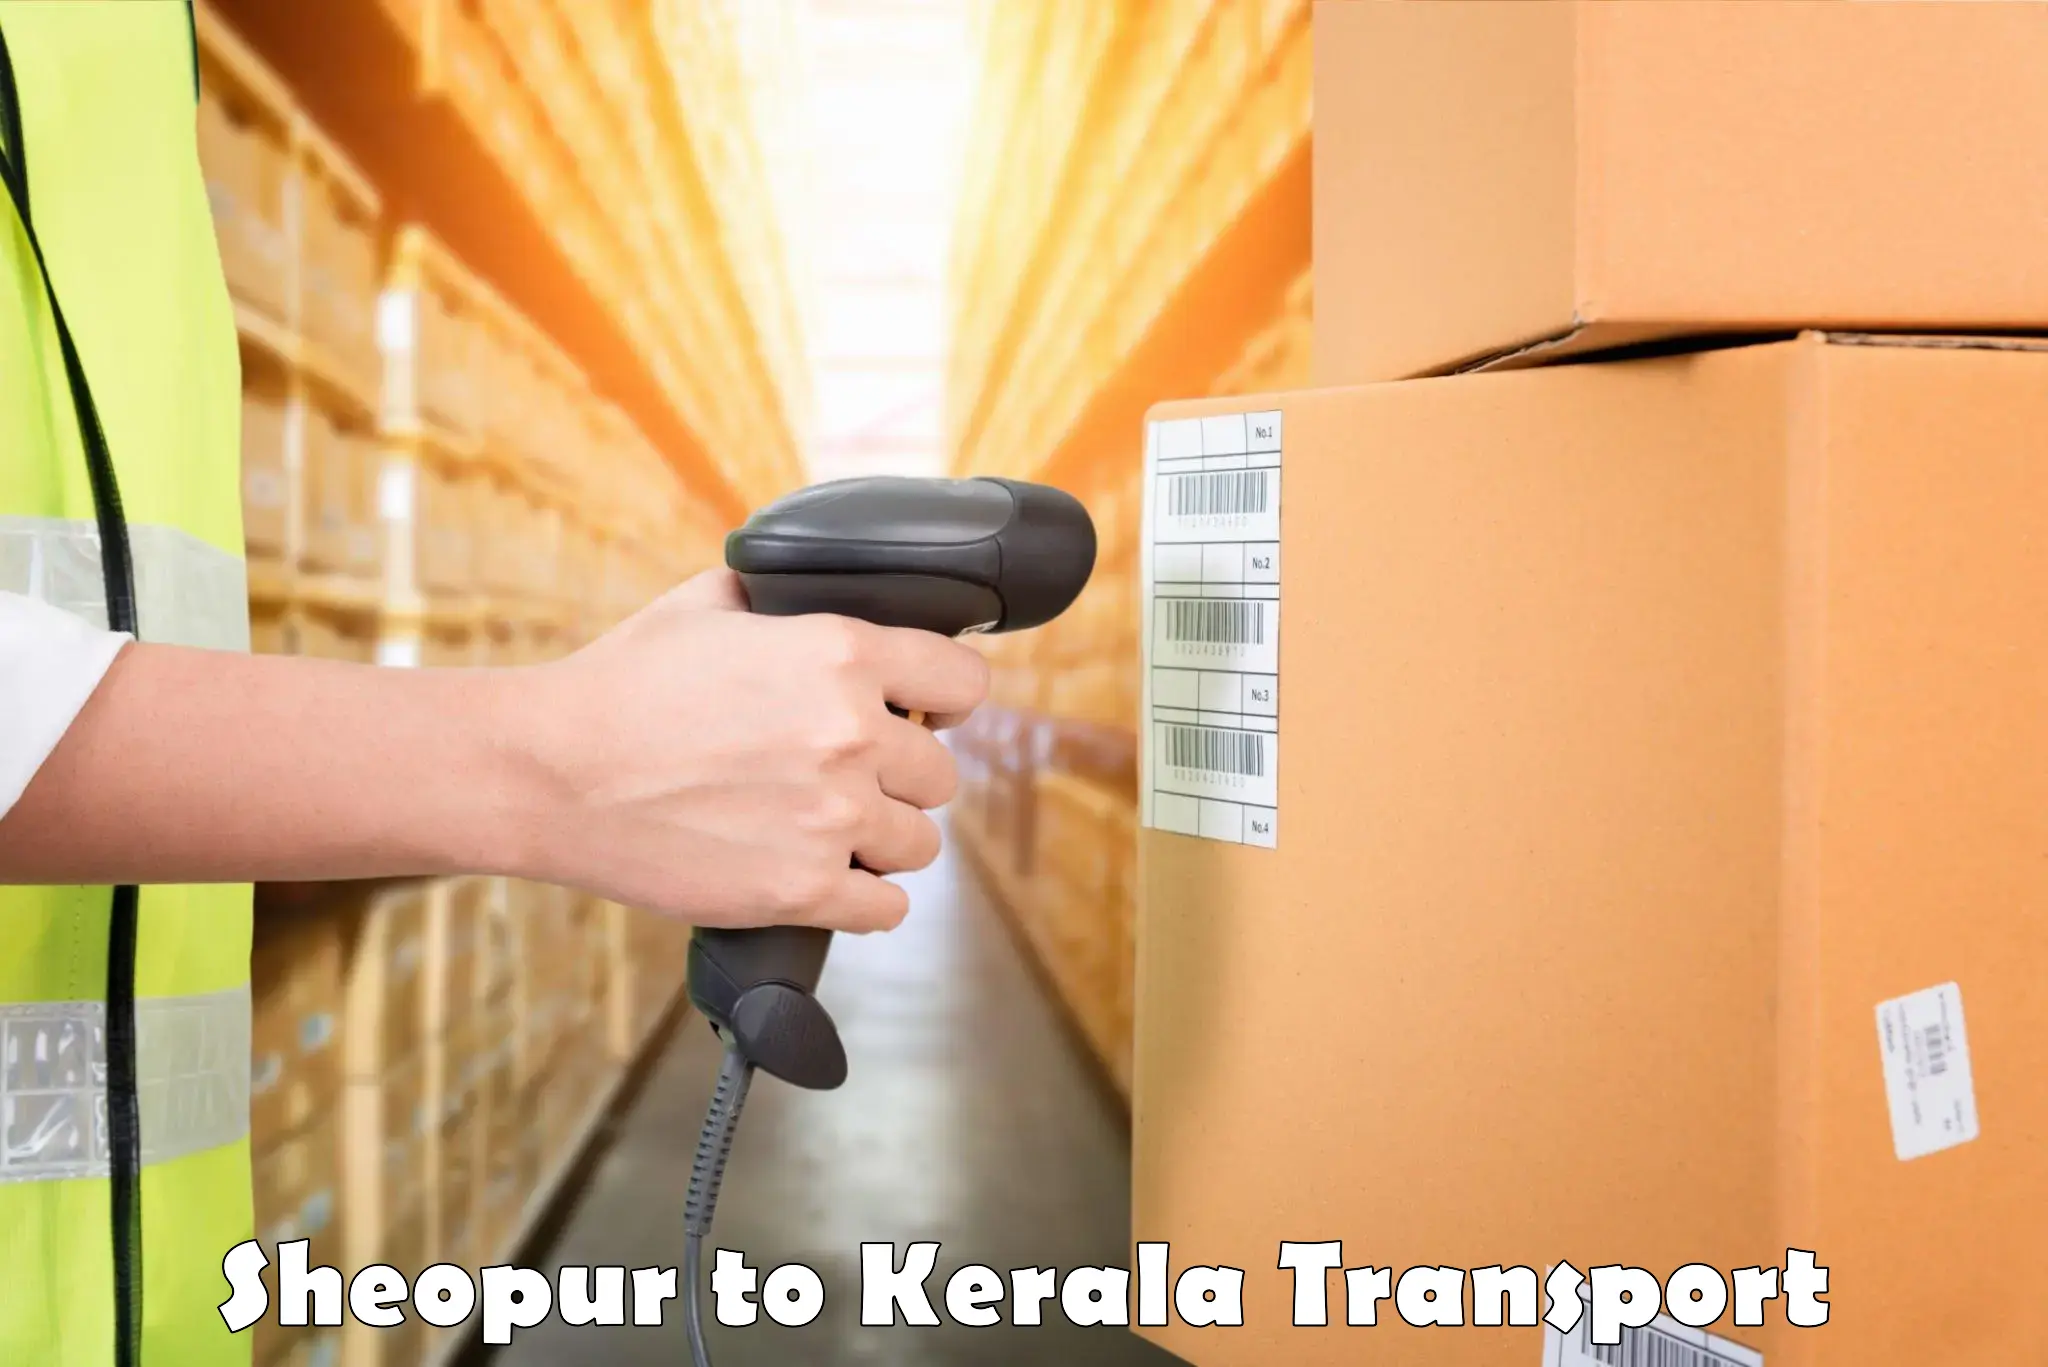 Lorry transport service Sheopur to Chalakudy